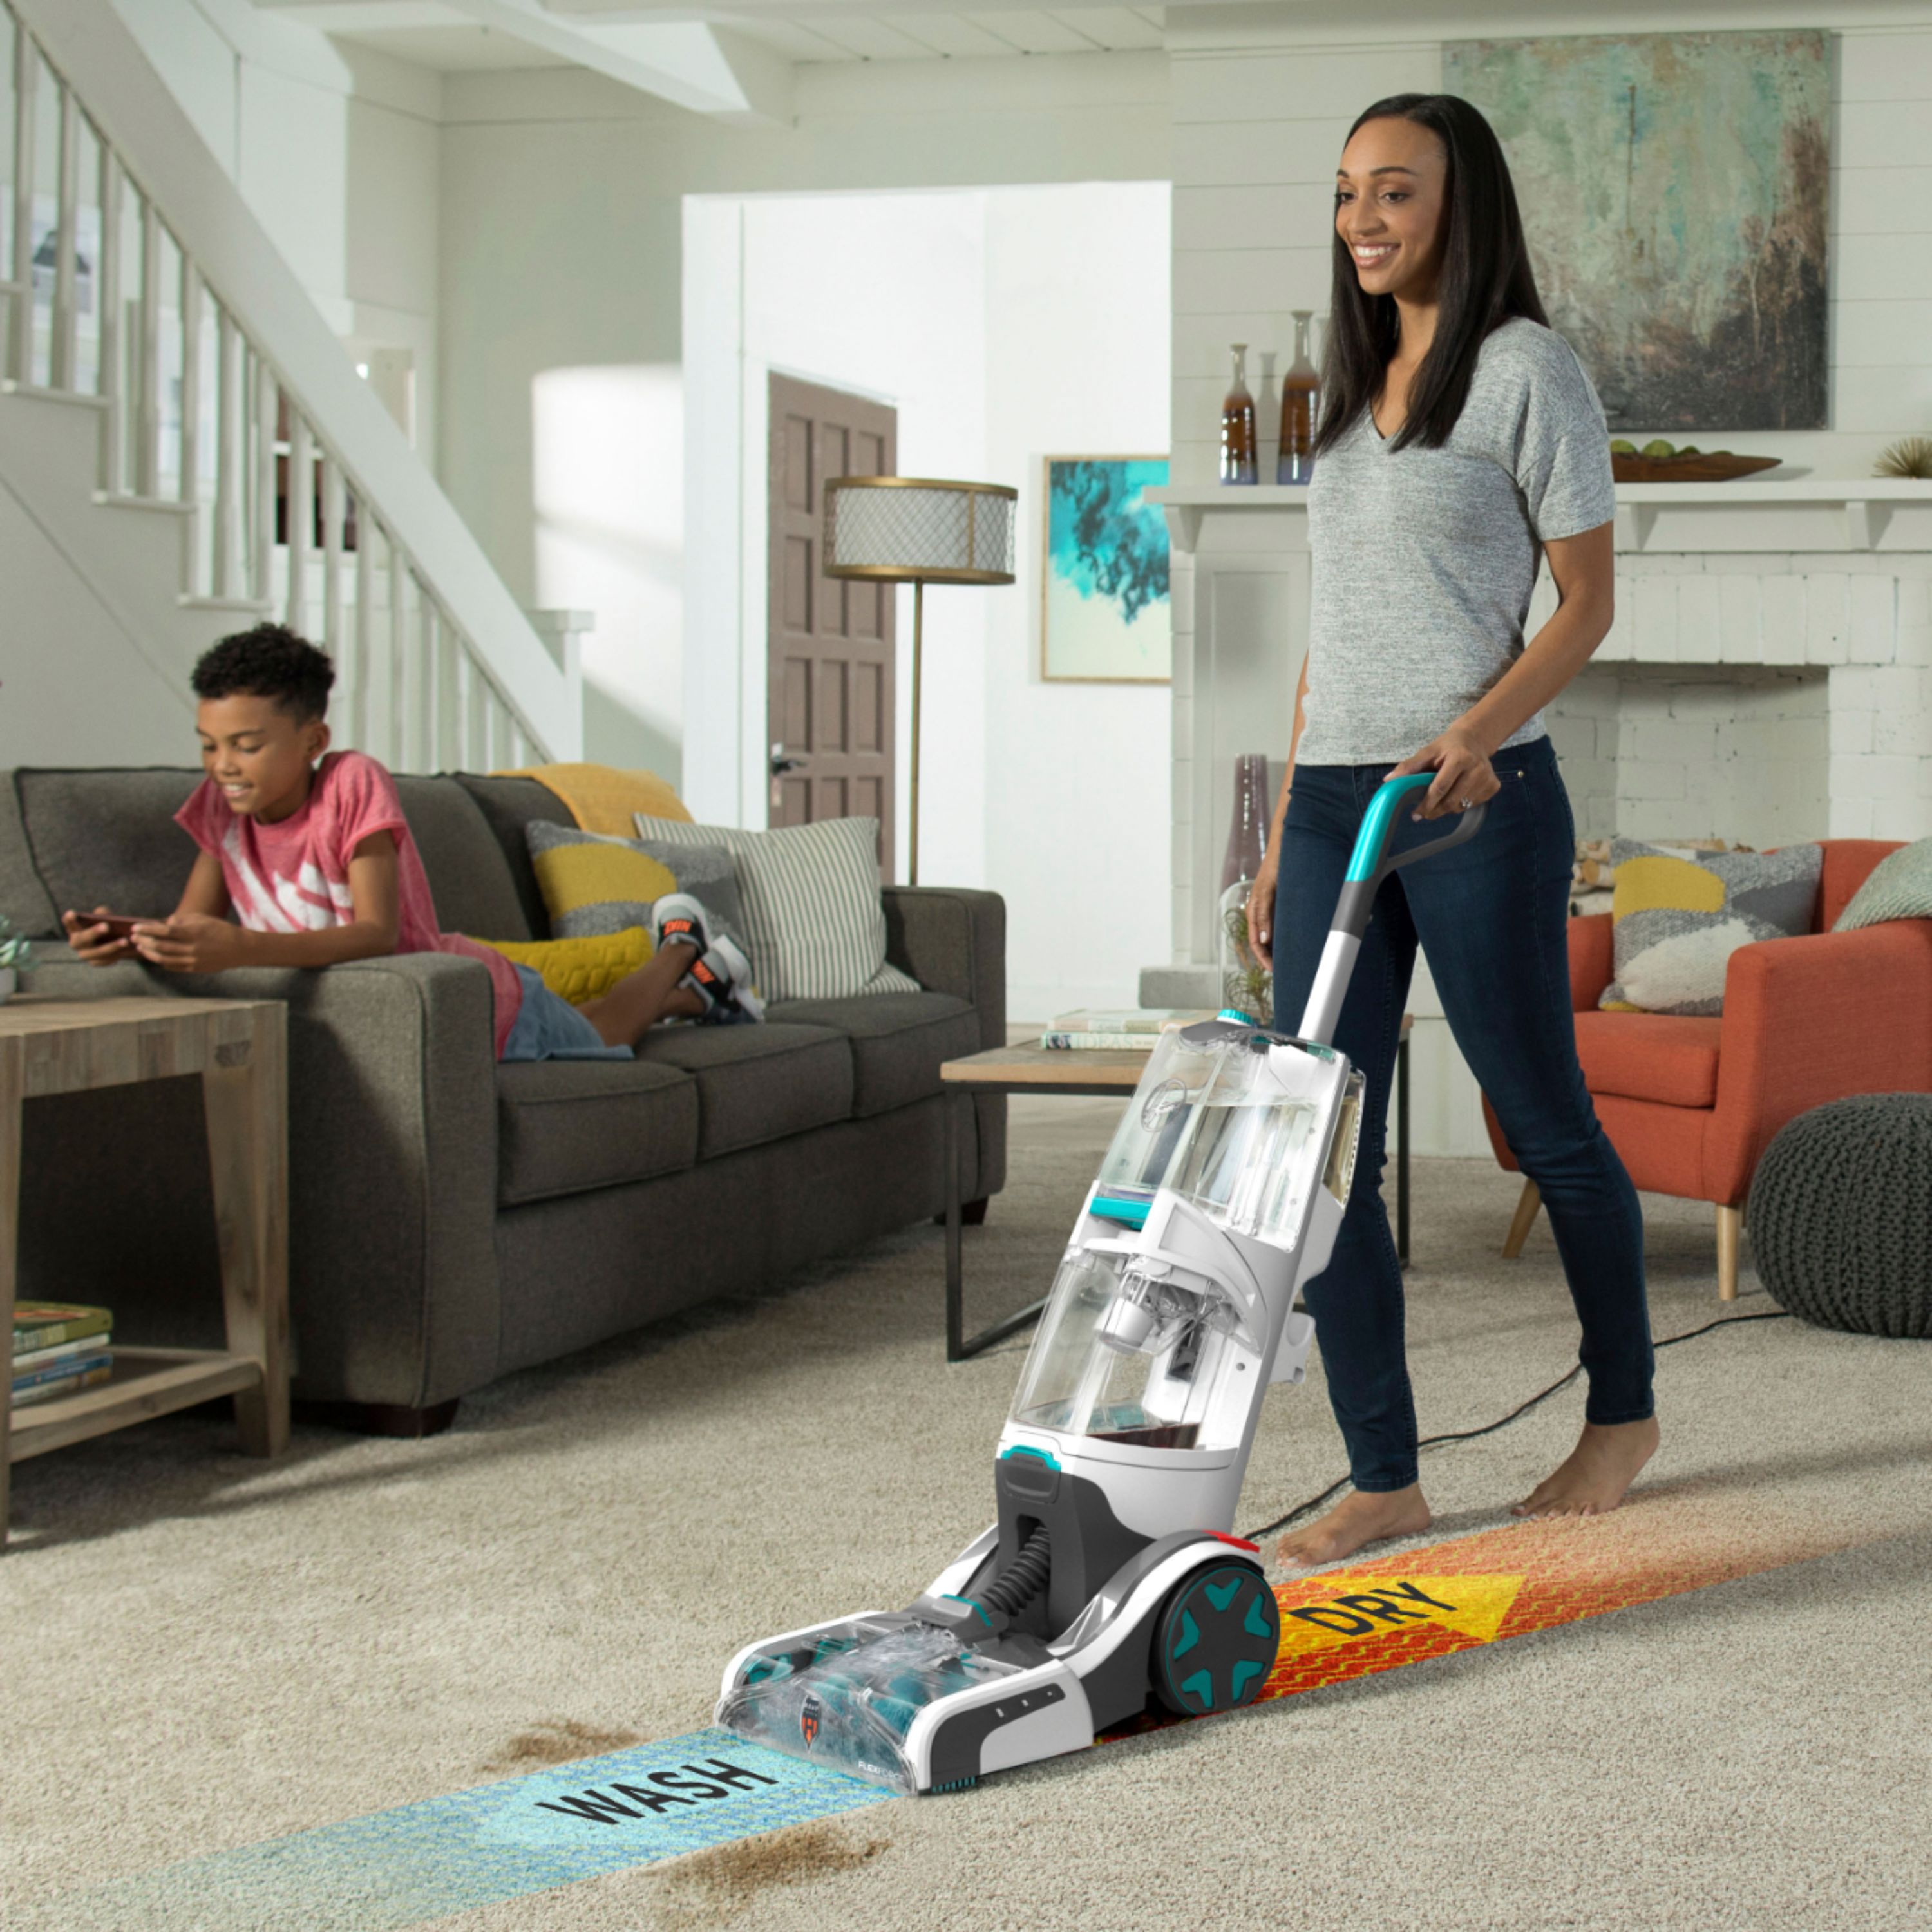 Hoover SmartWash+ Automatic Carpet Cleaner with Oxy Carpet Cleaner Solution